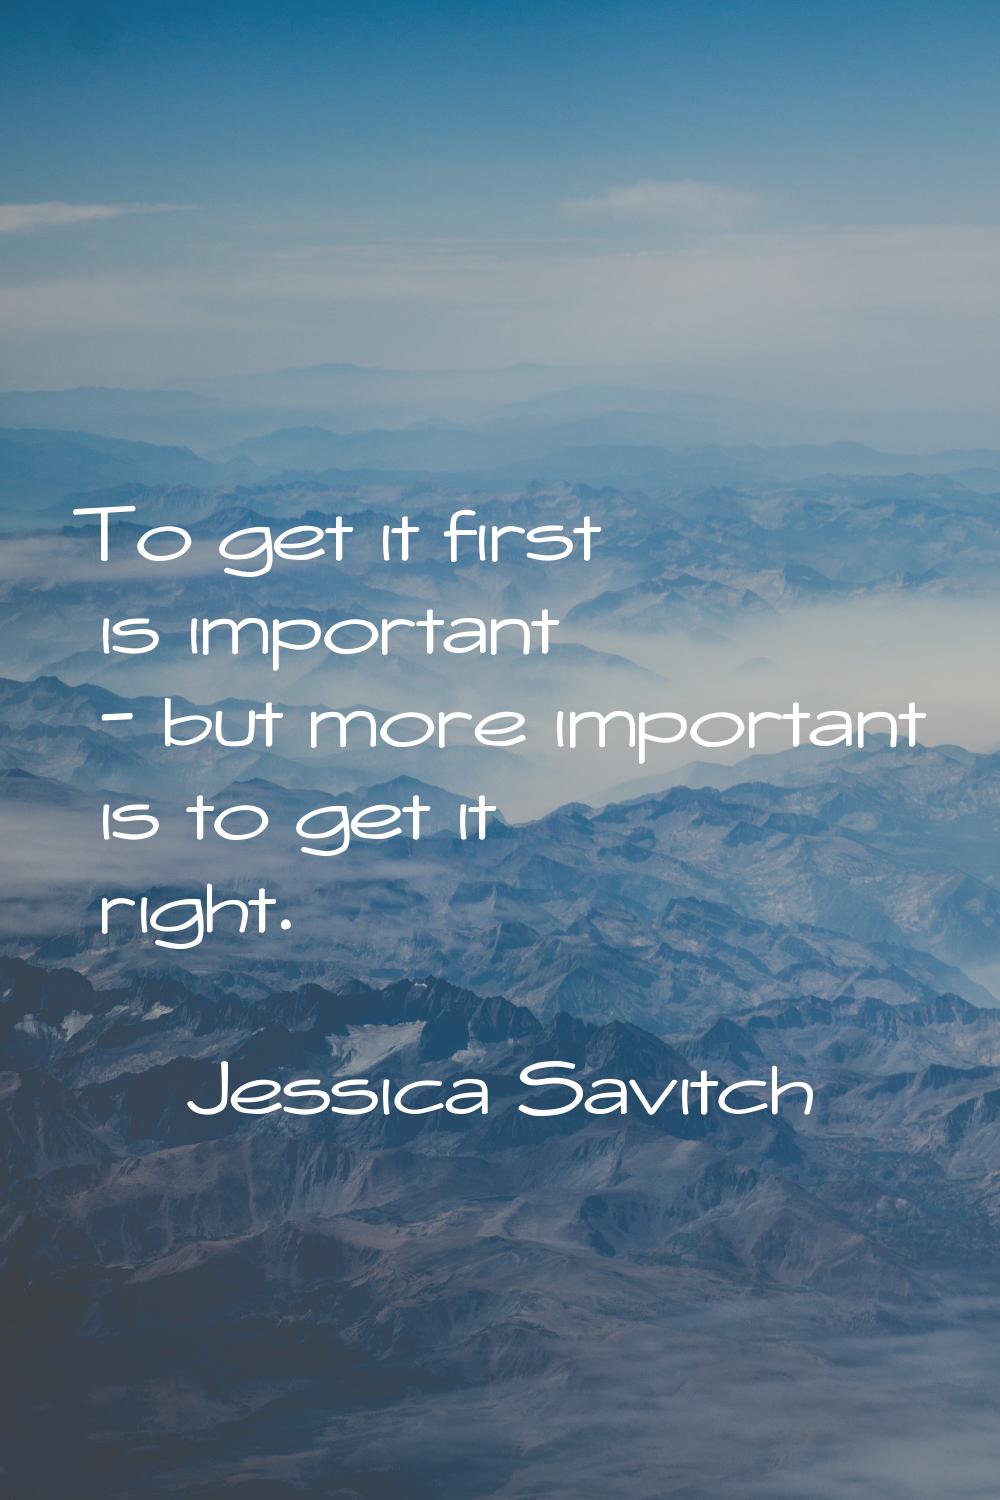 To get it first is important - but more important is to get it right.